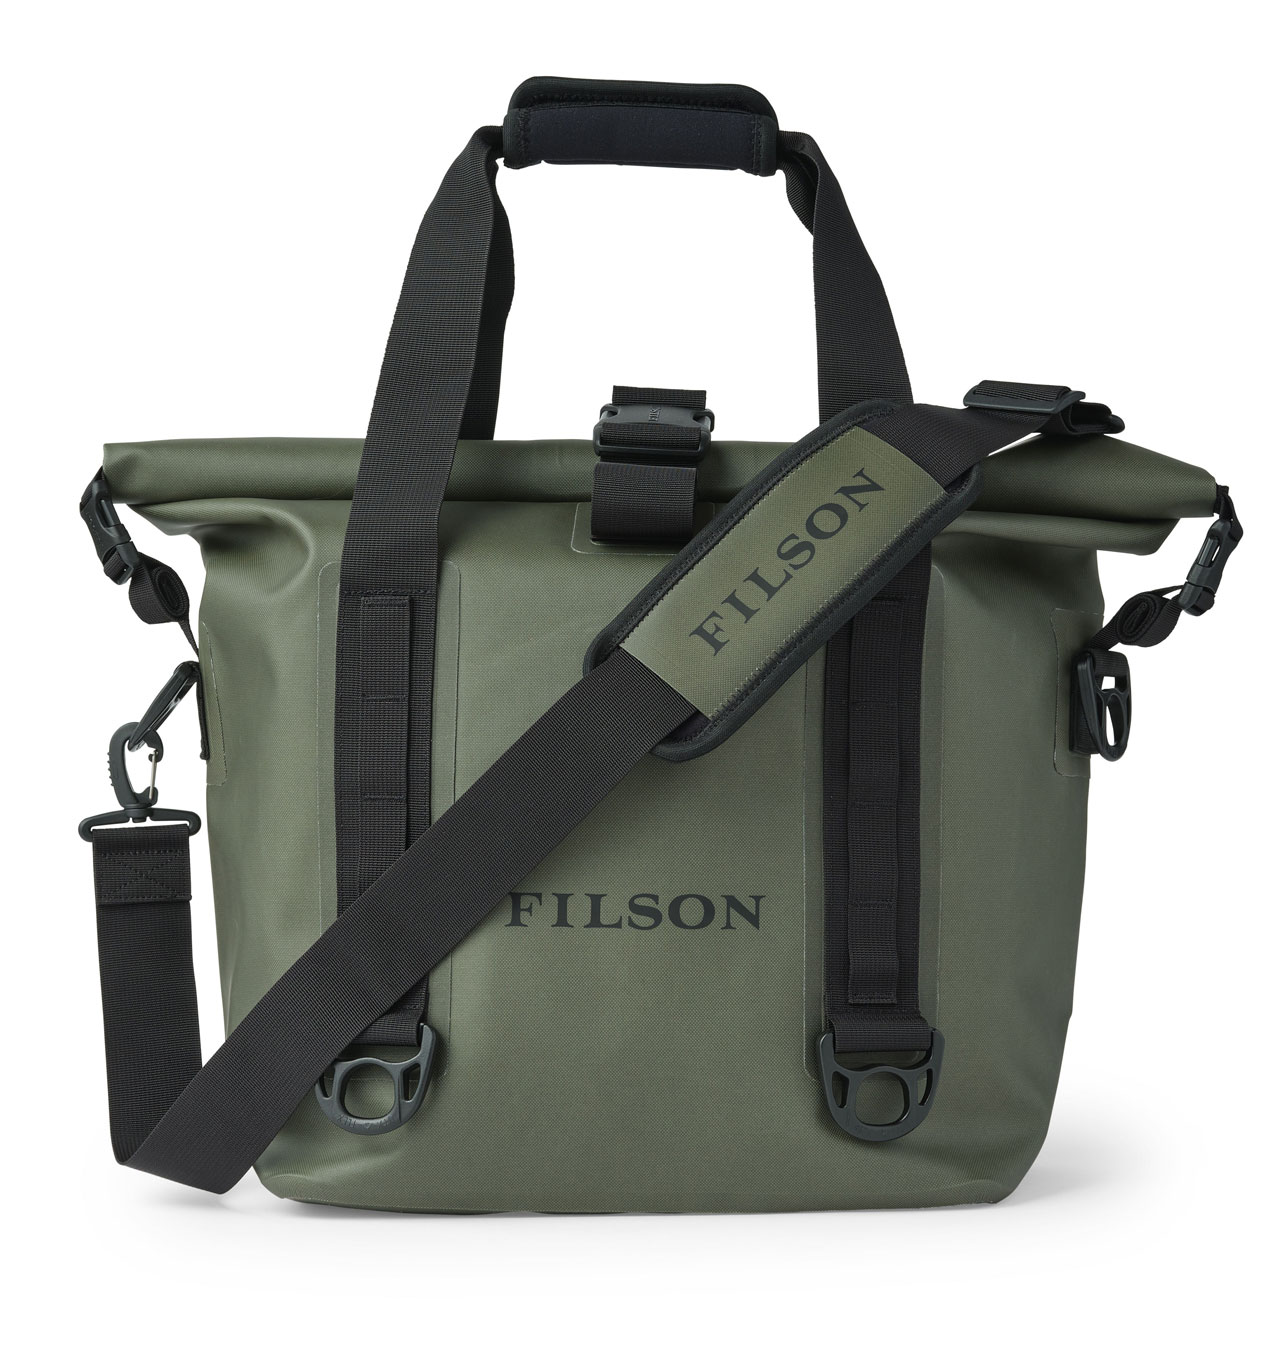 Filson---Dry-Roll-Top-Tote-Bag---Green-1